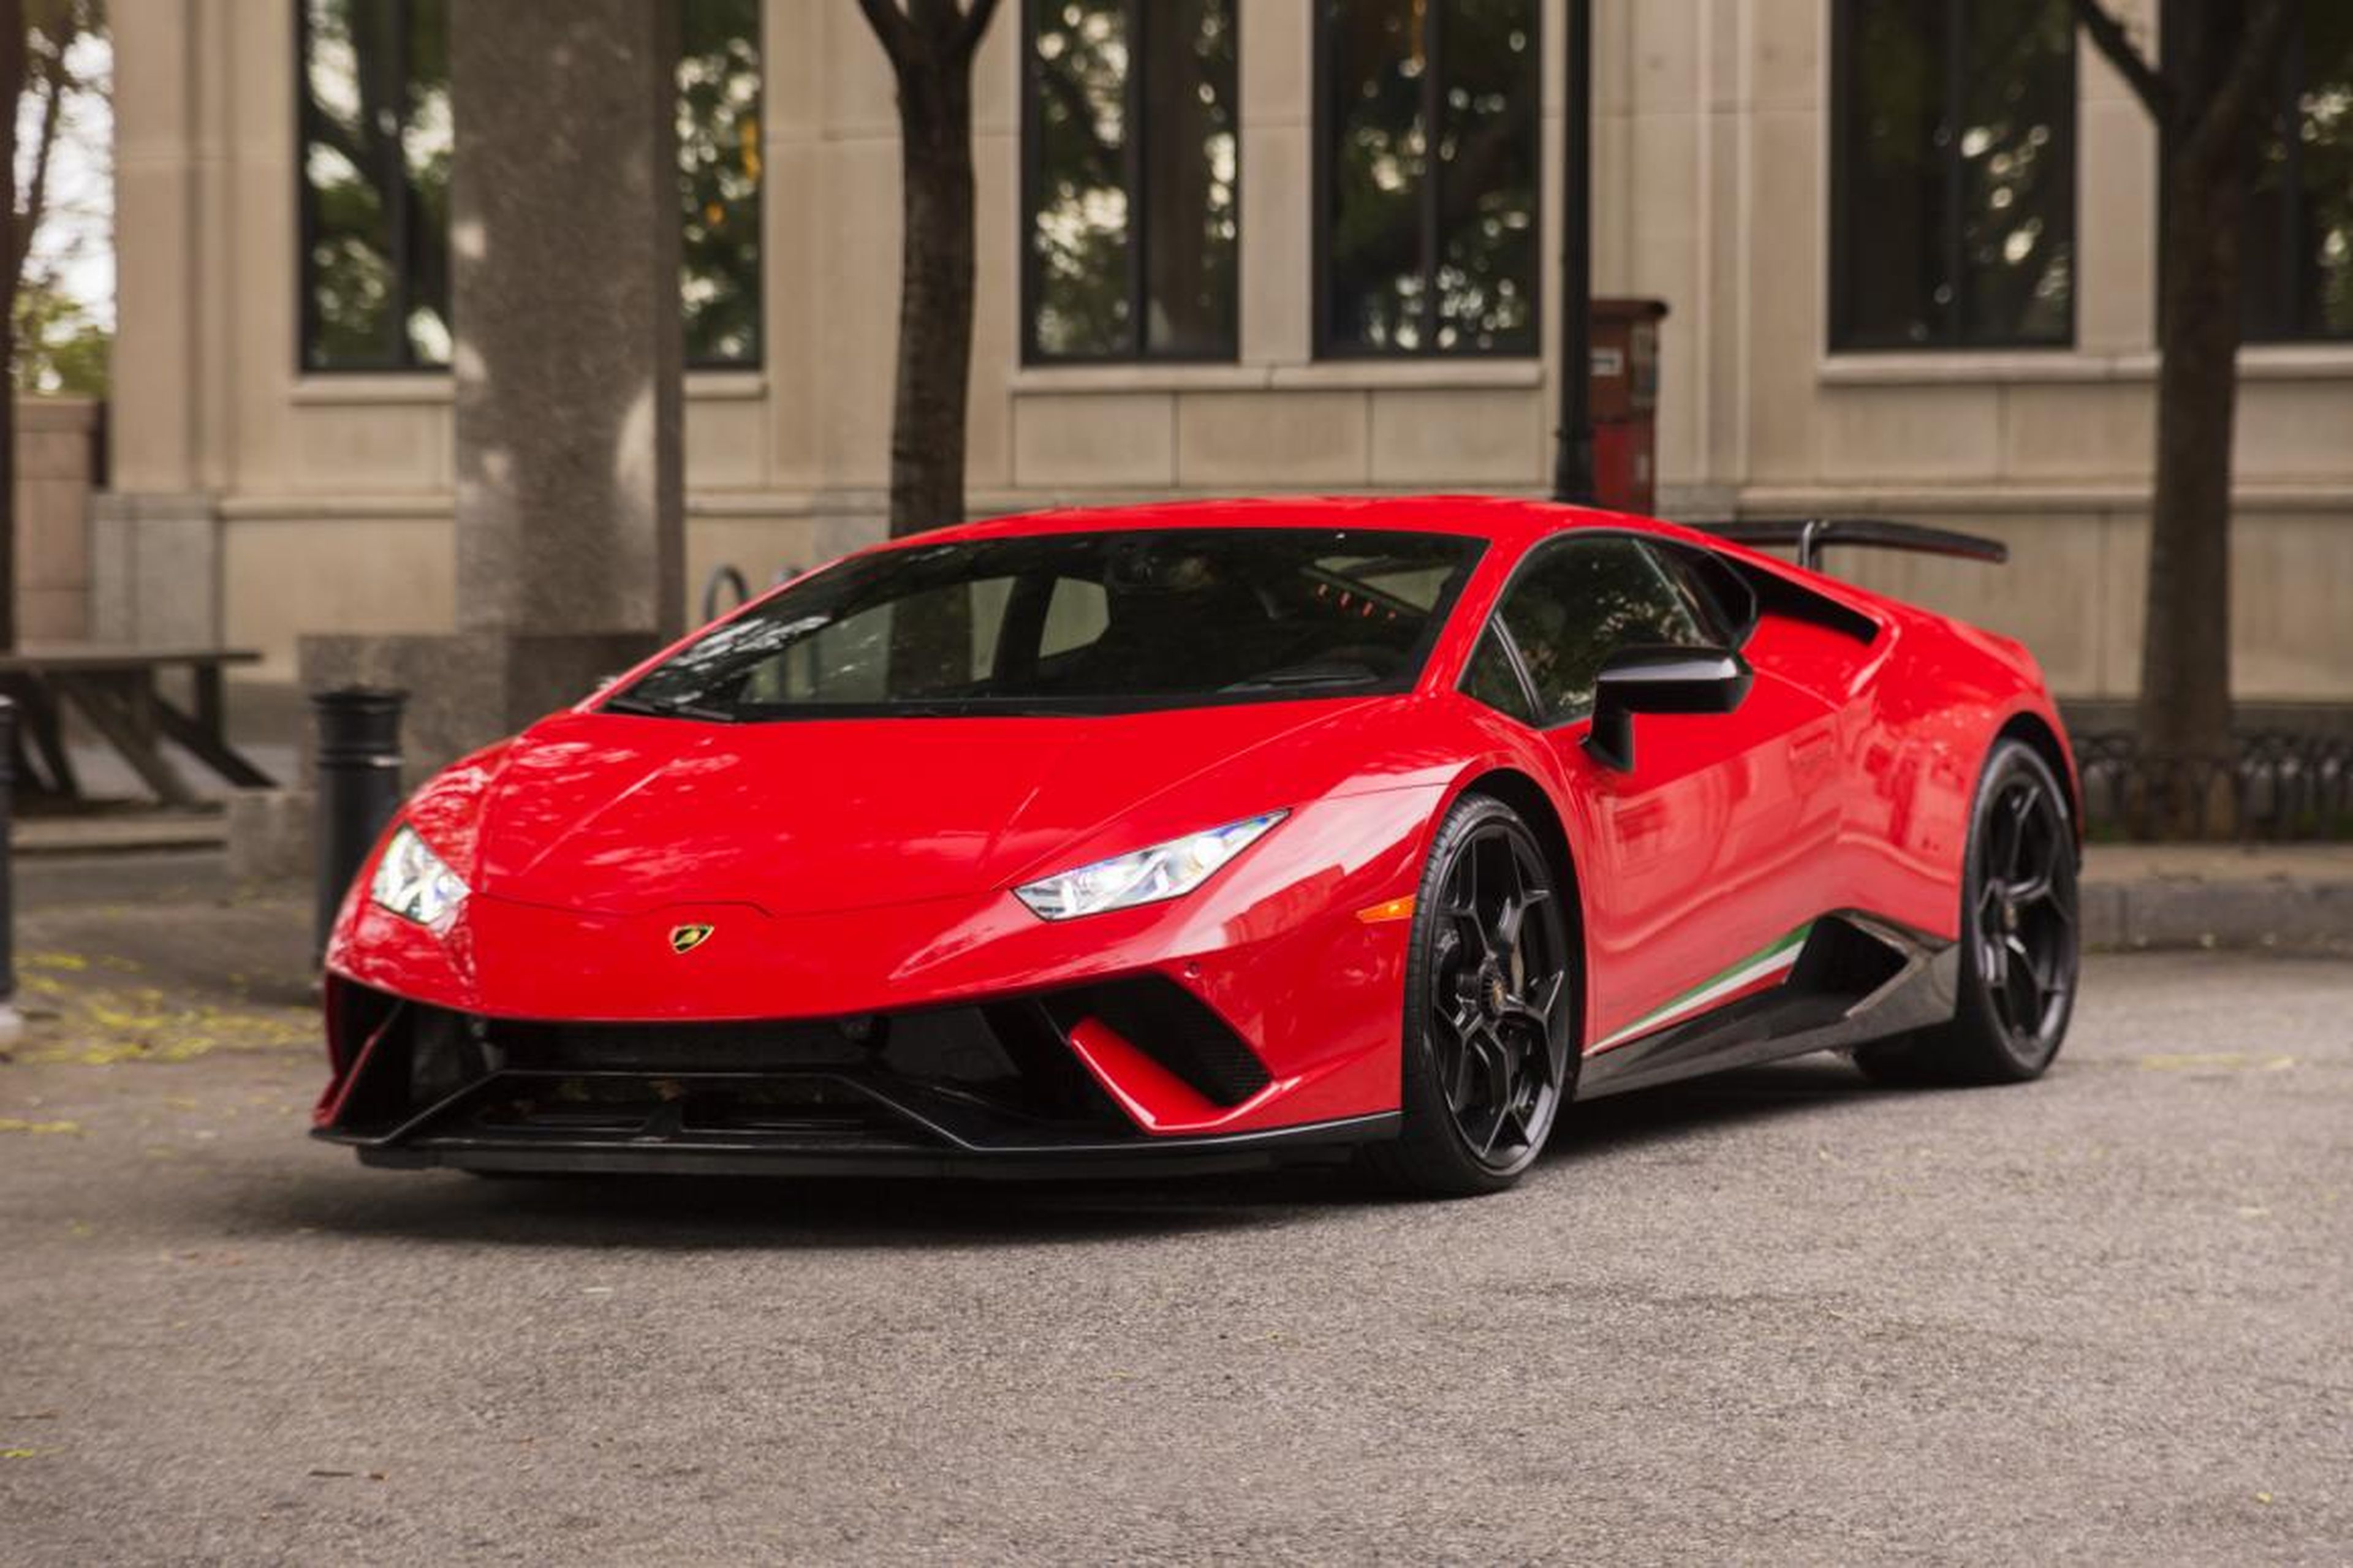 Behold! The shark-like Lamborghini Huracán Performante, in a dashing "Rosso Mars" paint job. Our tester was the all-wheel-drive version.